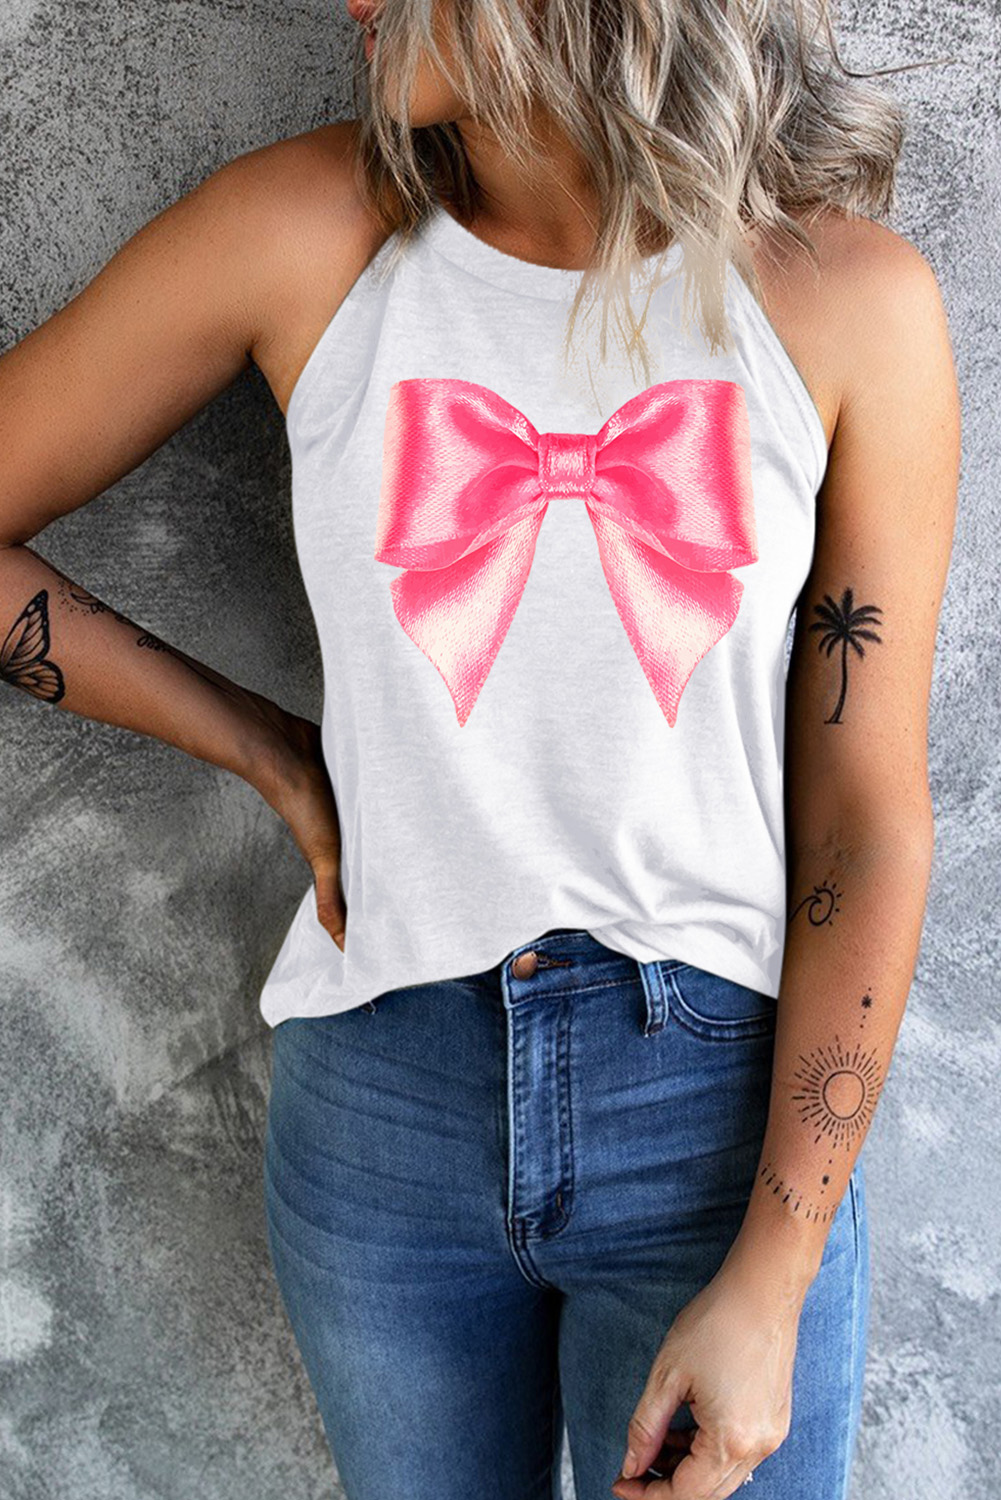 Shewin Wholesale Lady White Bow TIE Graphic Halter Tnak Top